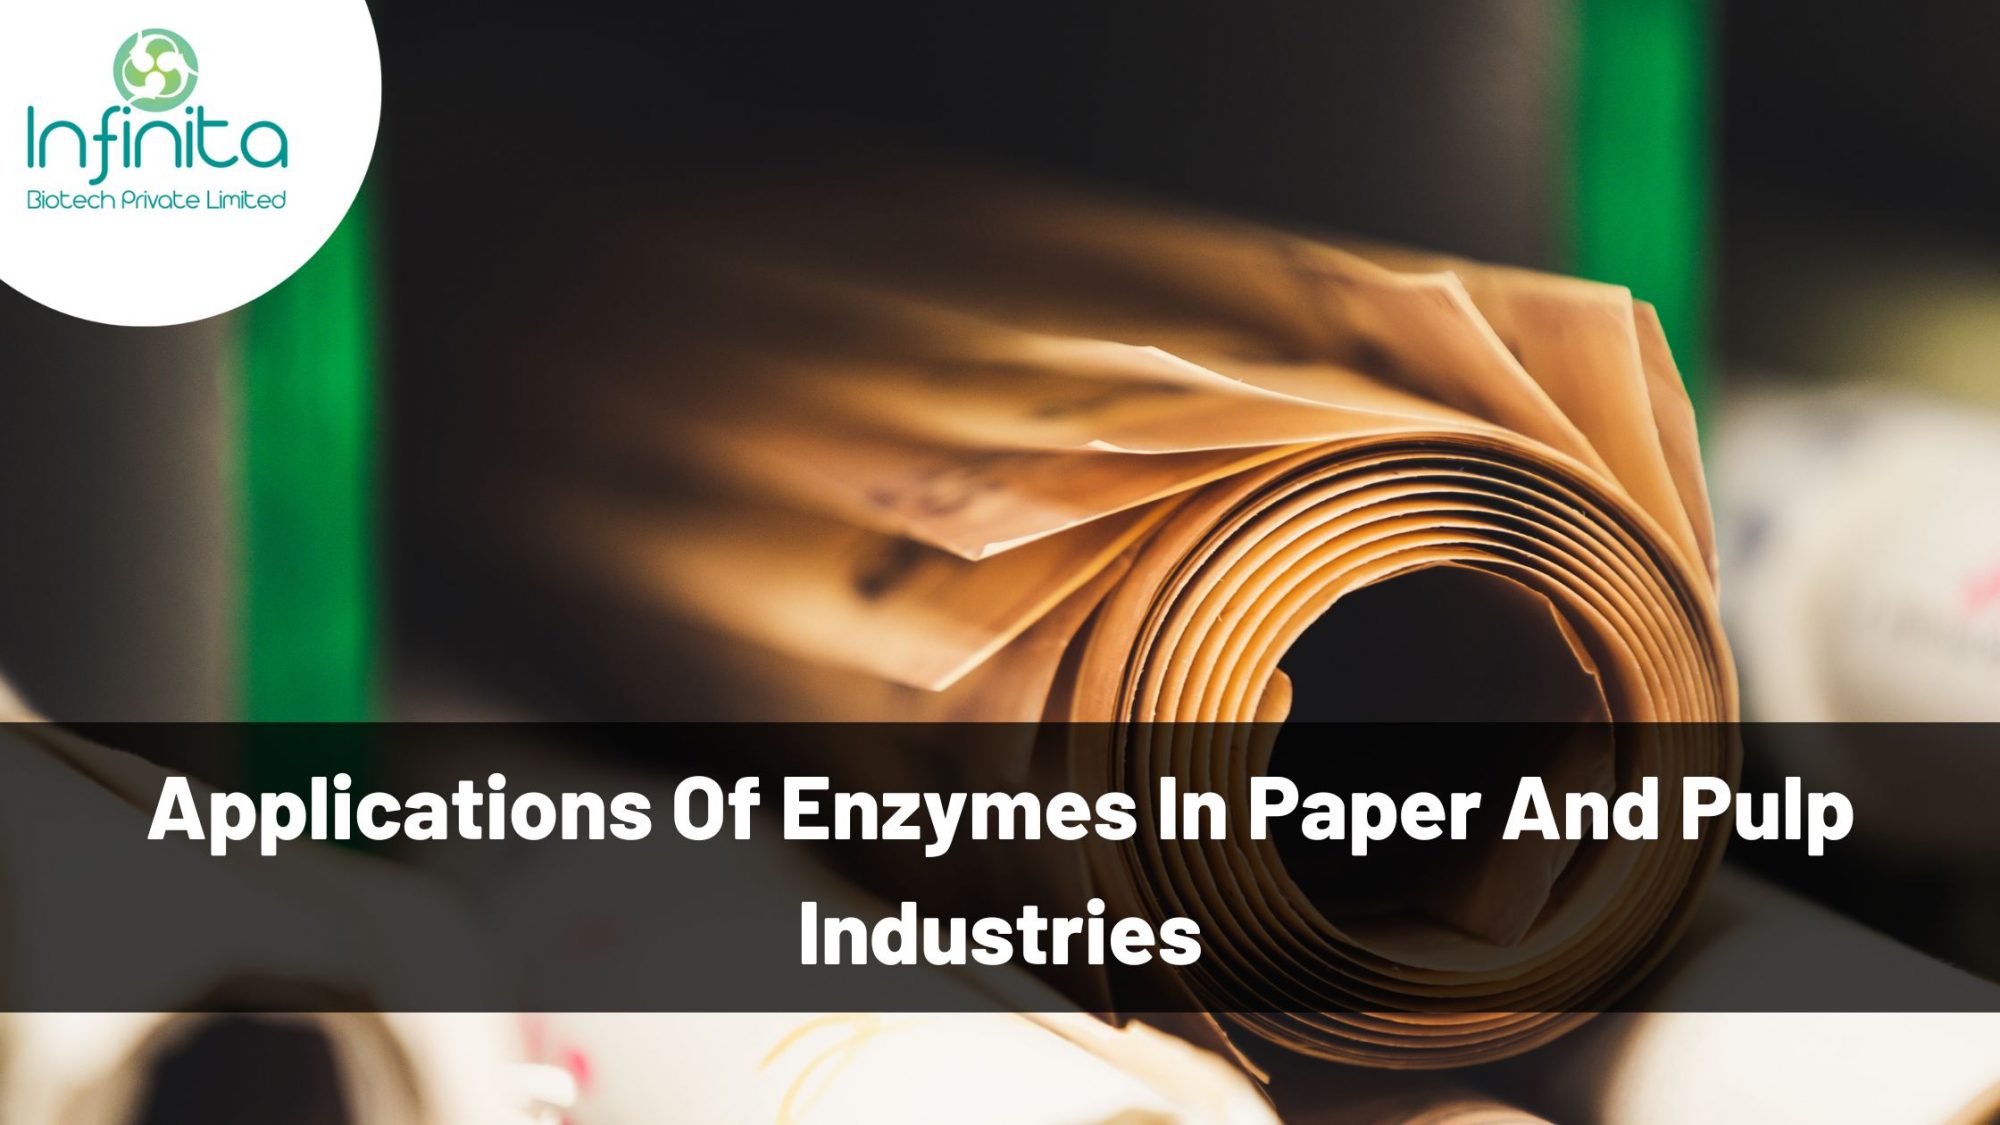 Applications of Enzymes in Paper and Pulp Industries